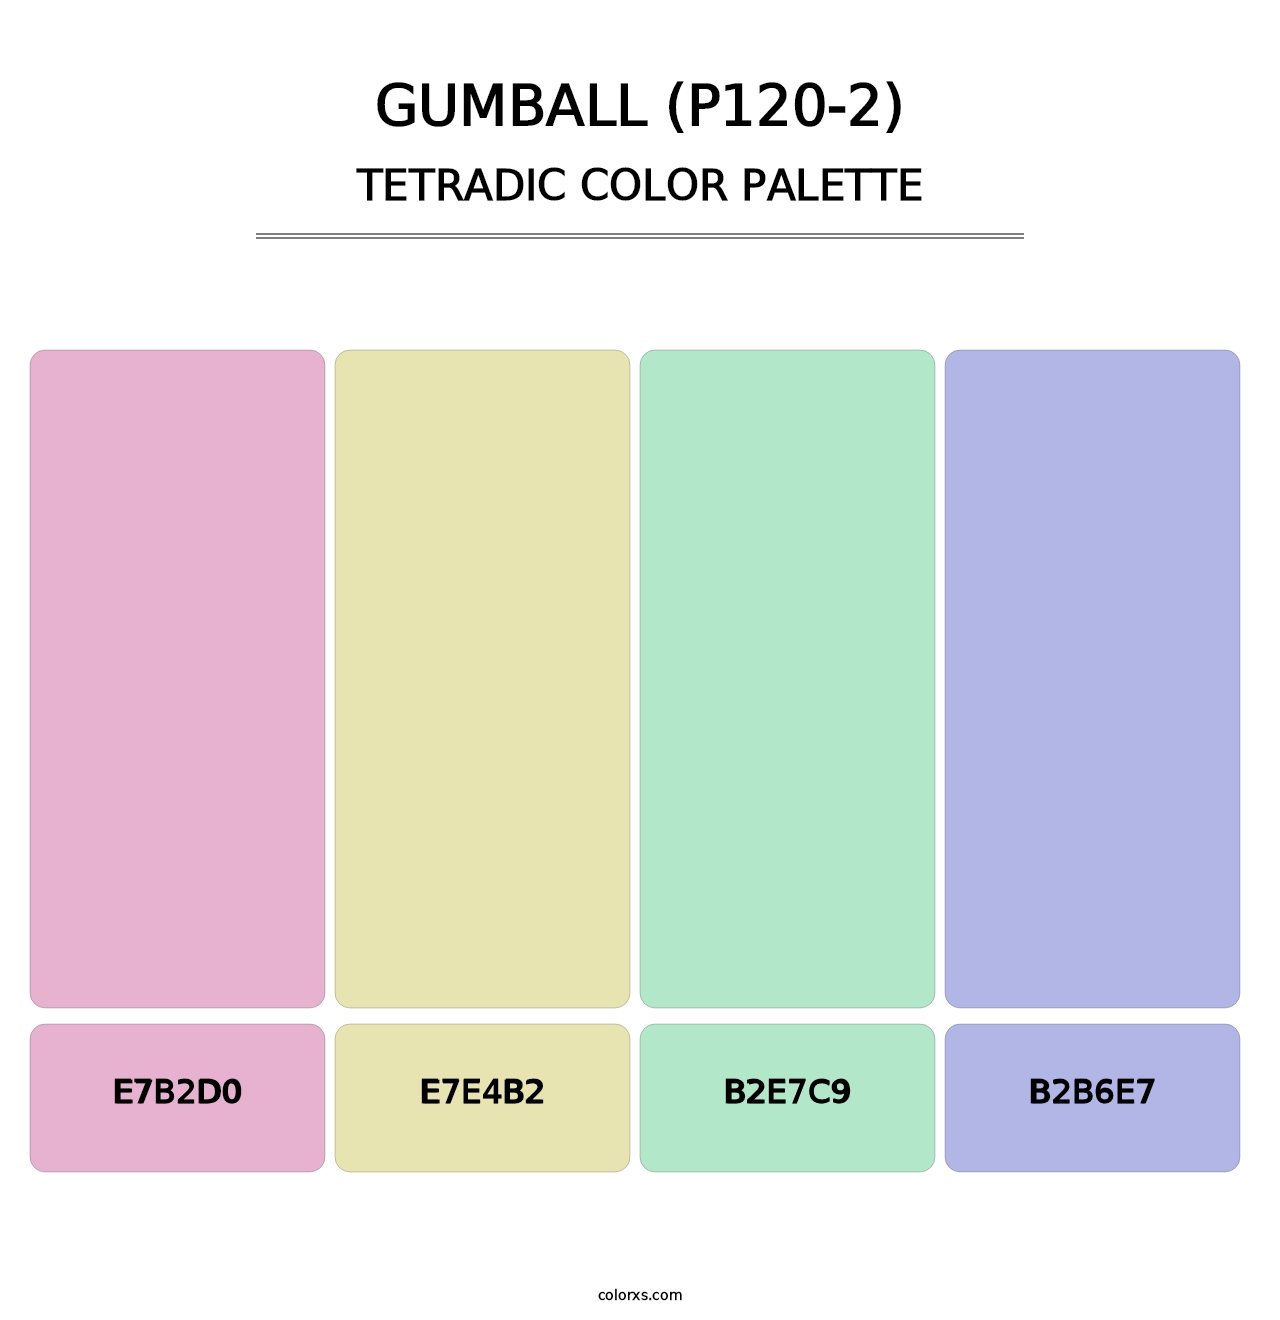 Gumball (P120-2) - Tetradic Color Palette